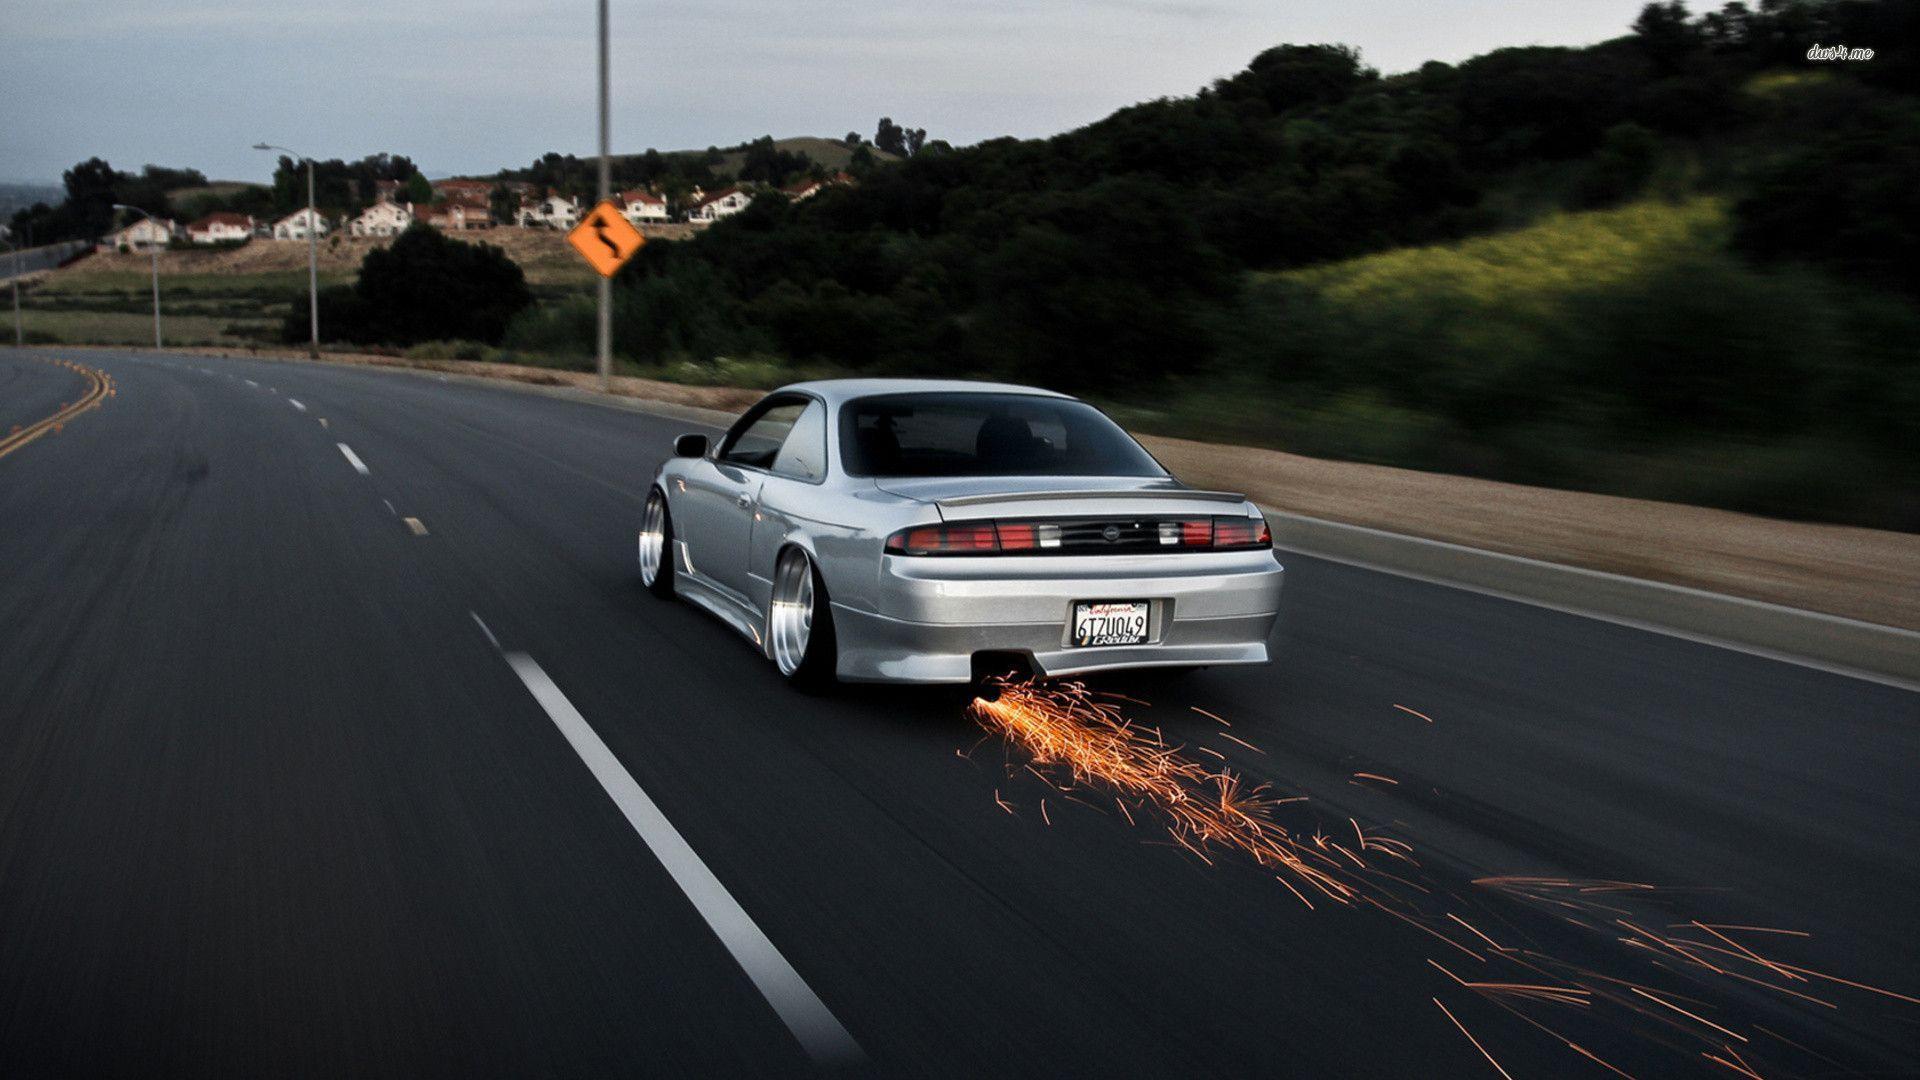 Picture Nissan 240sx Tuned Car Wallpaper In High Resolution